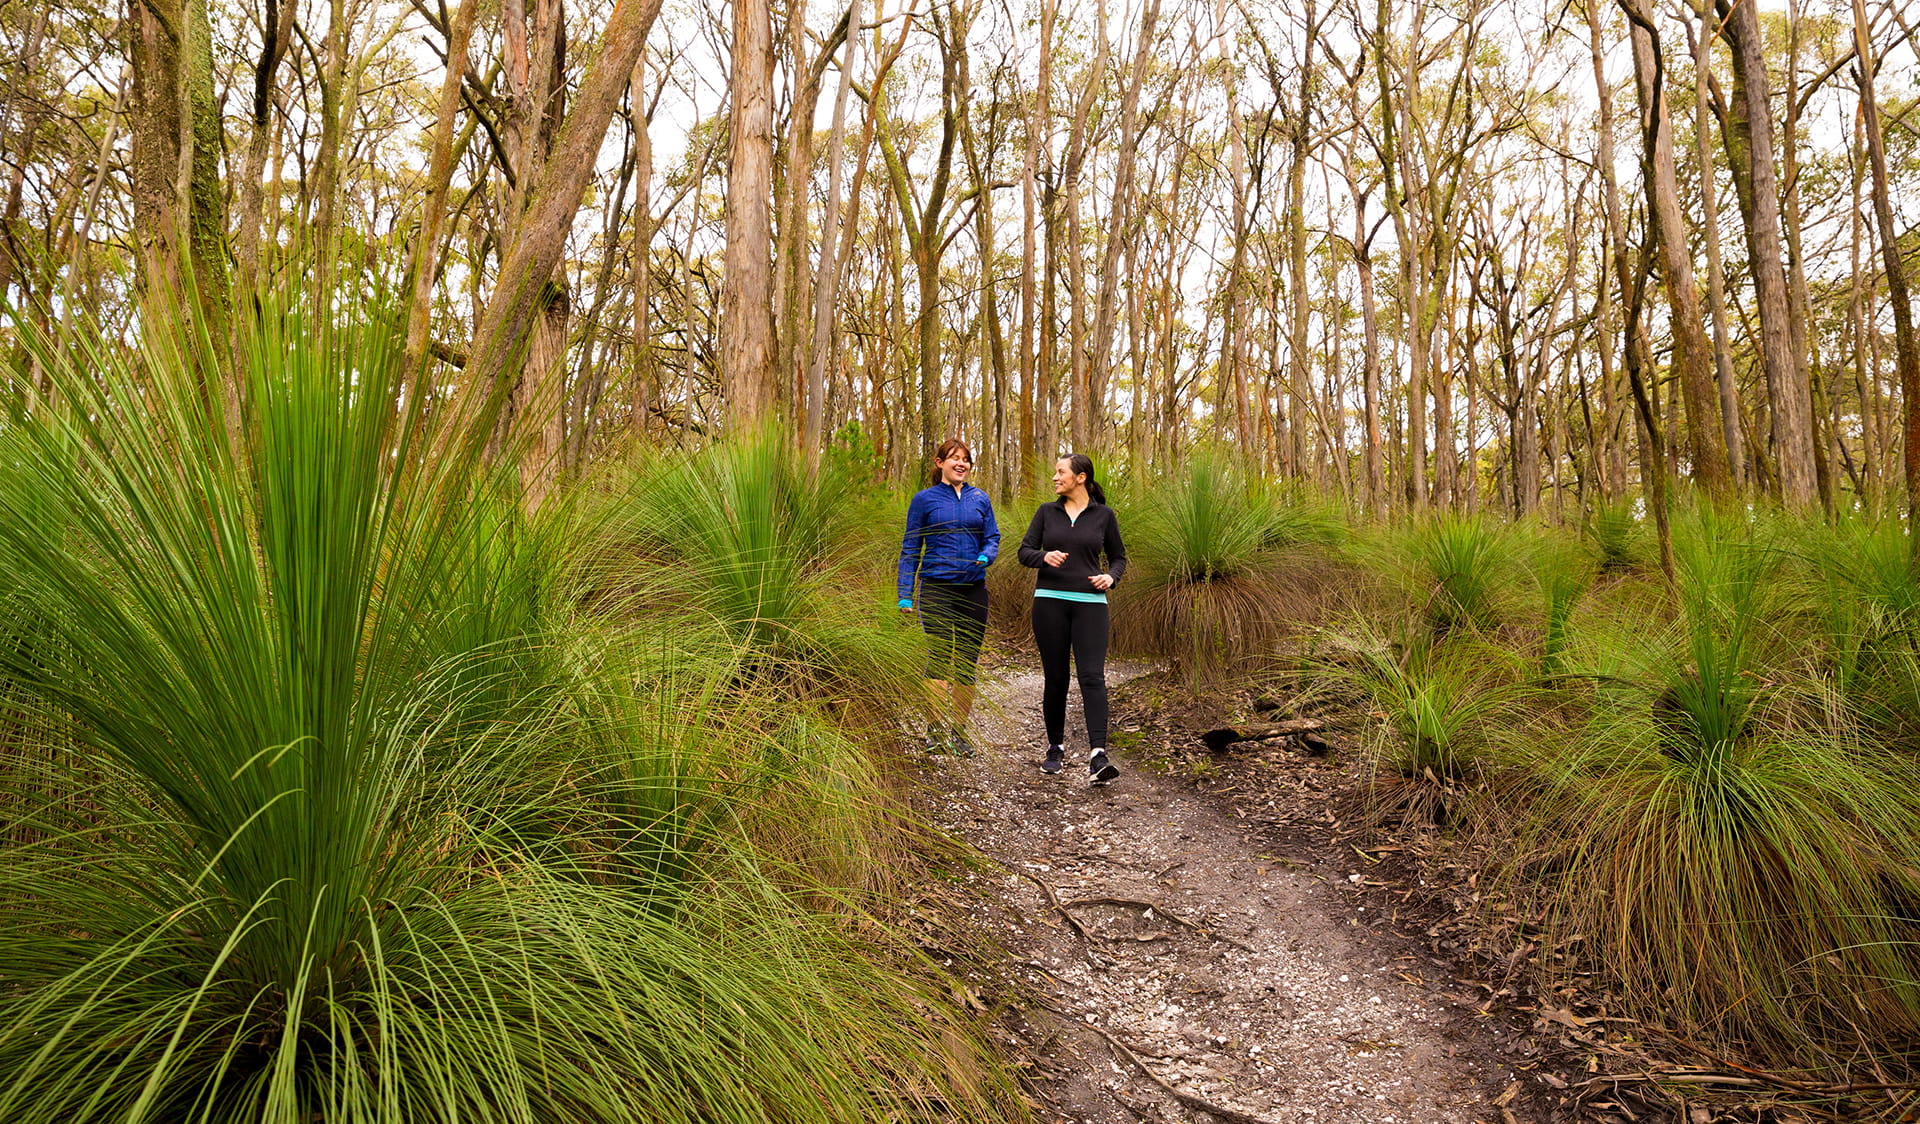 Two women walking along a path through trees and grasses.